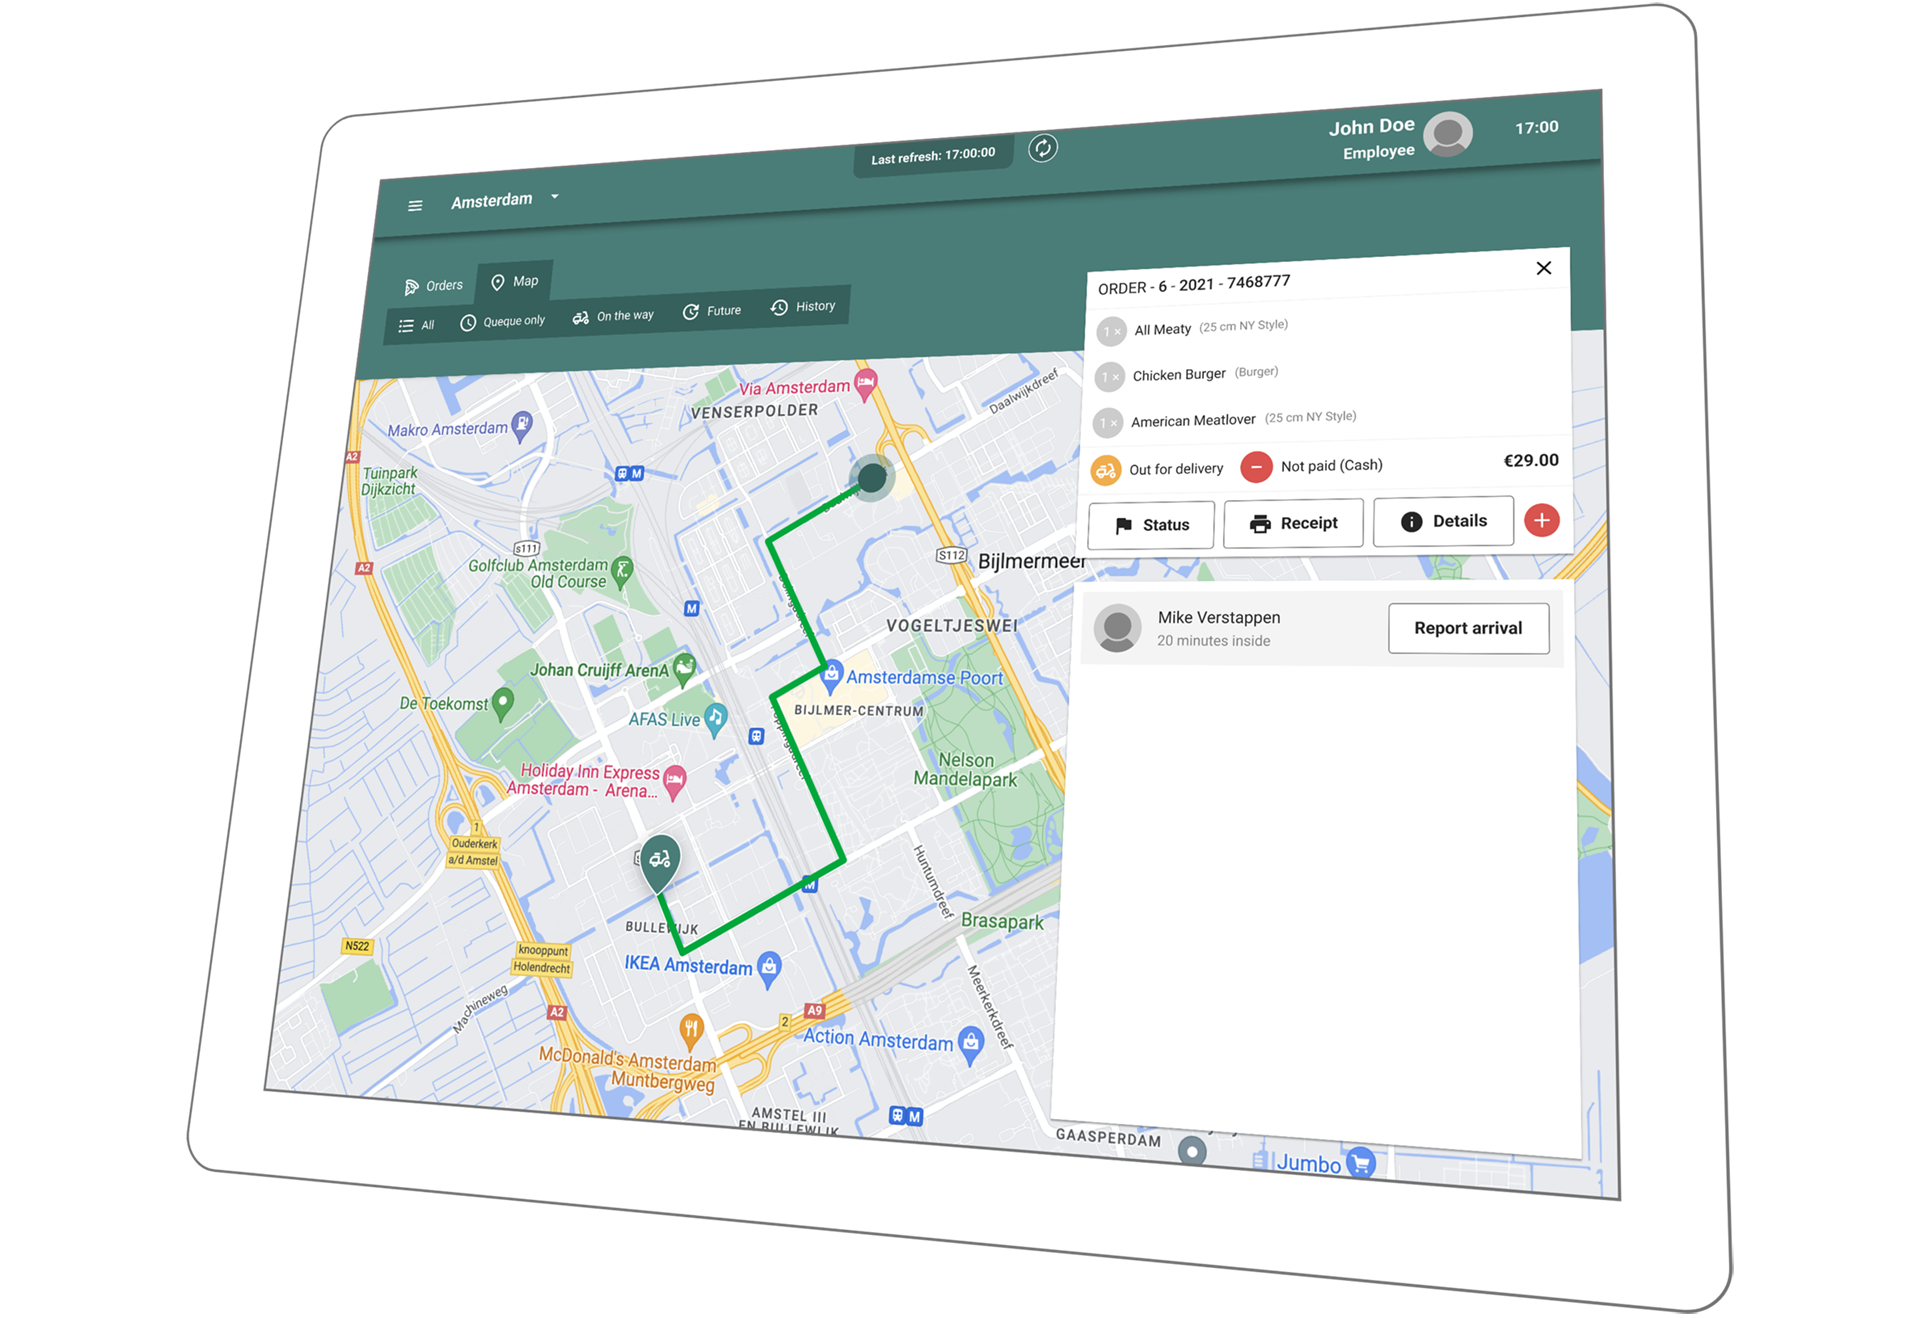 Tablet showingdispatching screen and a delivery driver map.